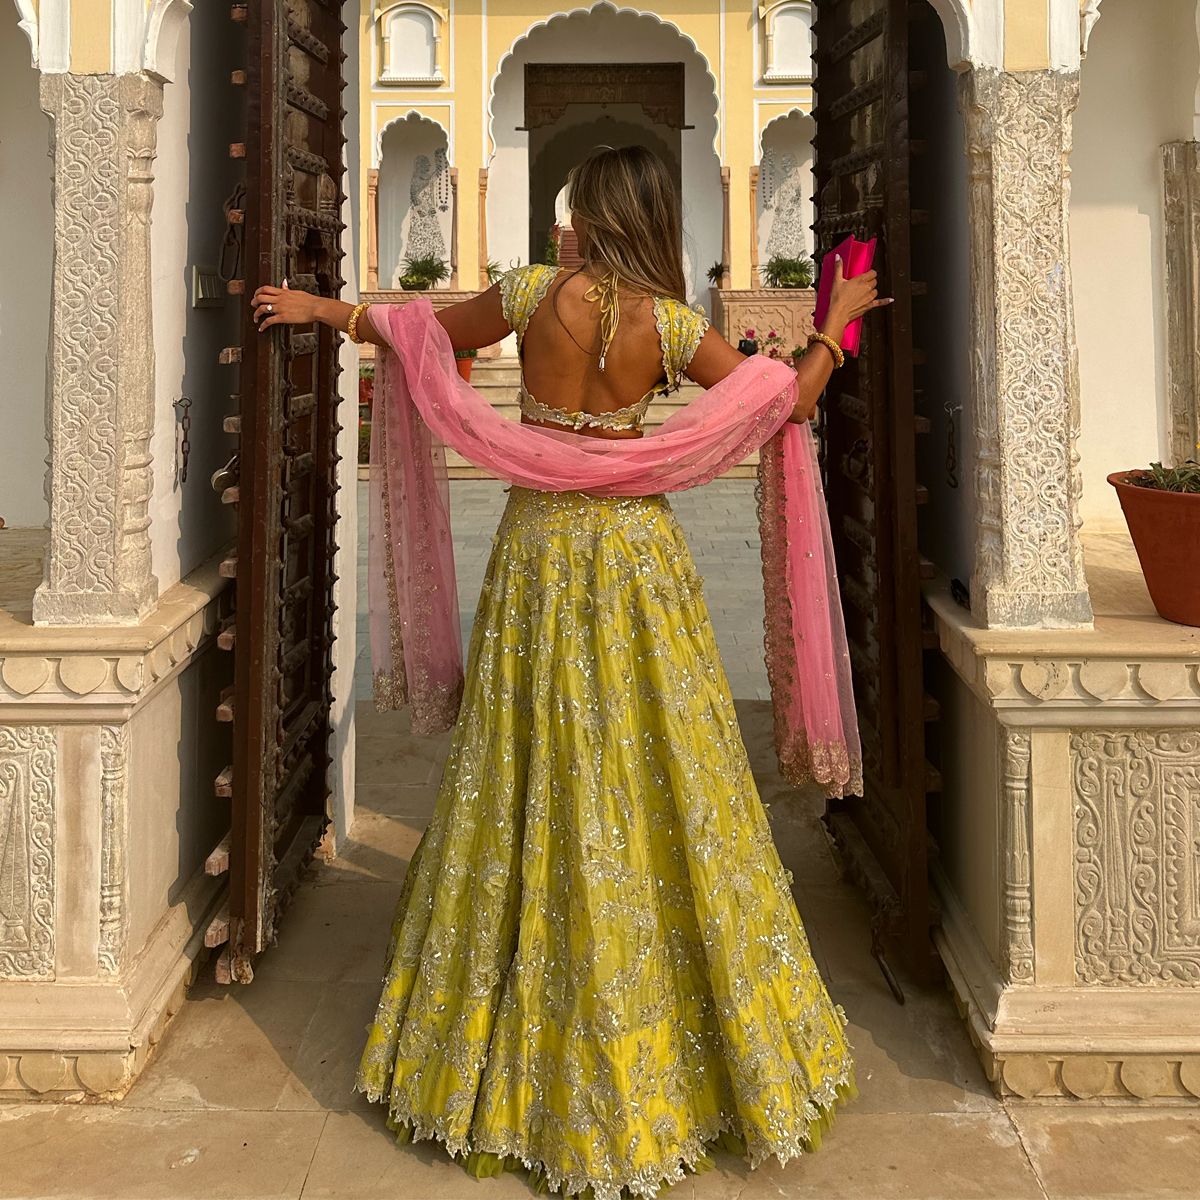 What You Should (and Shouldn't) Wear As a Guest at An Indian Wedding